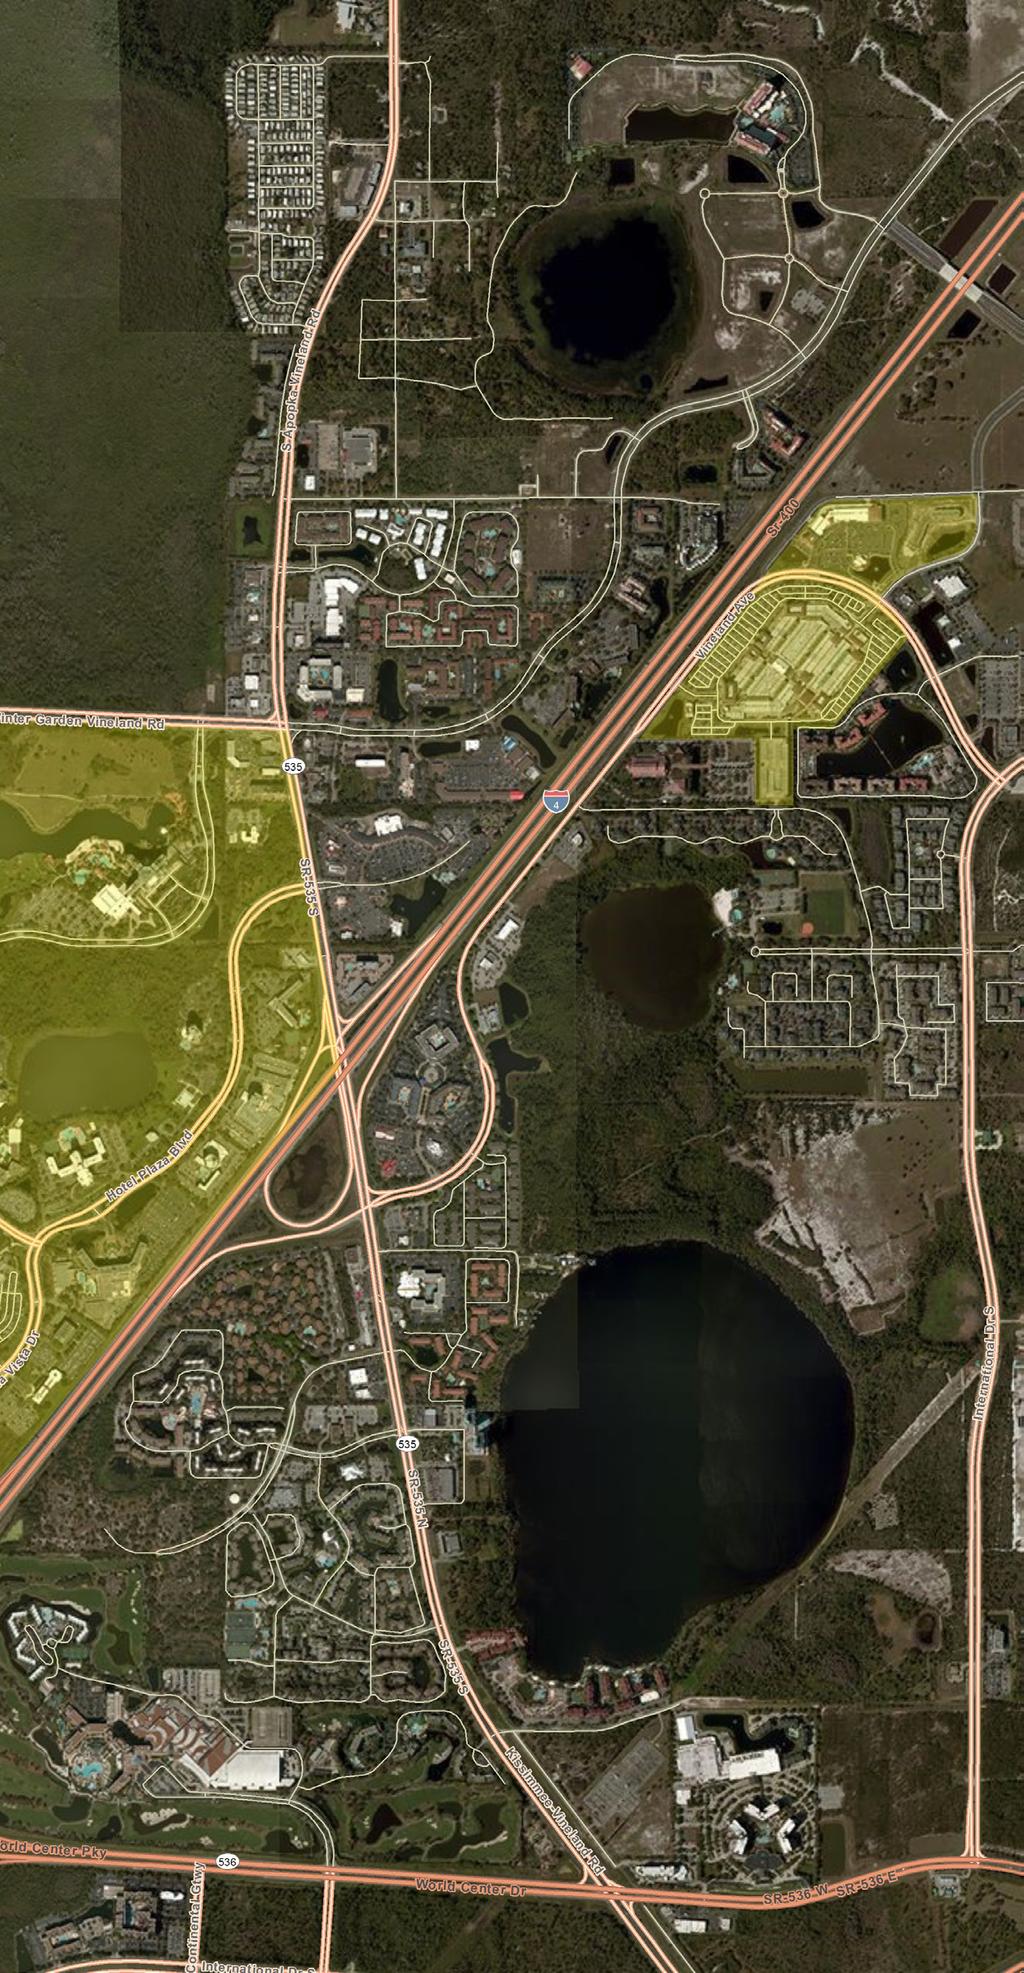 Lake Bryan - 12± Acres Site WALT DISNEY WORLD 9 minute drive ORLANDO PREMIUM OUTLETS 6 minute drive ORLANDO PREMIUM OUTLETS - VINELAND WALT DISNEY WORLD Widely considered among the most popular